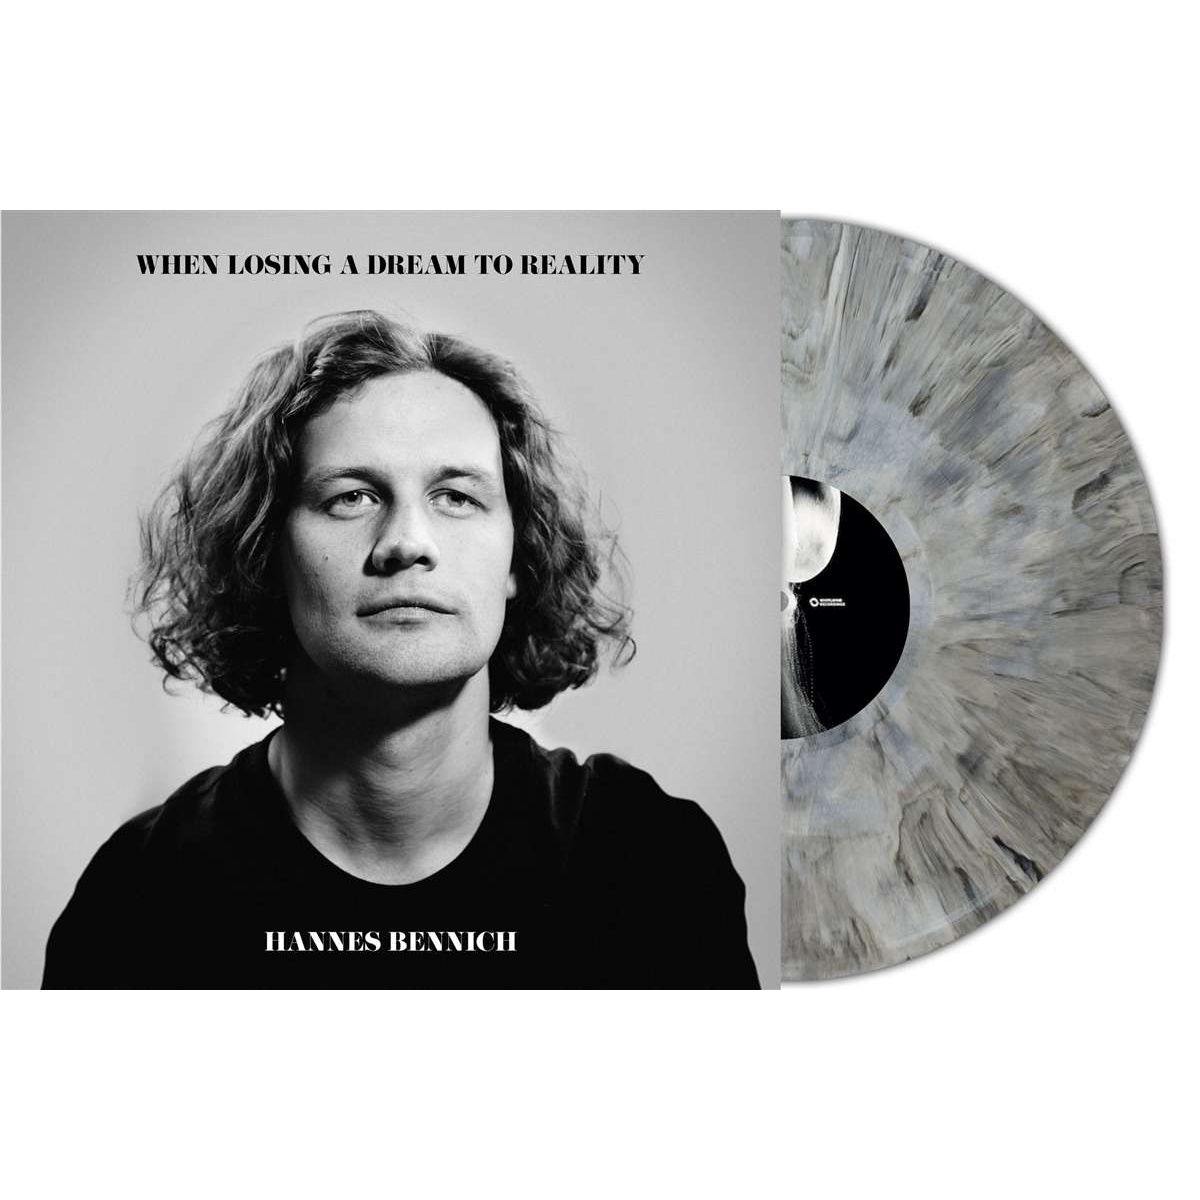 WHEN LOSING A DREAM TO REALITY (GREY MARBLE VINYL)